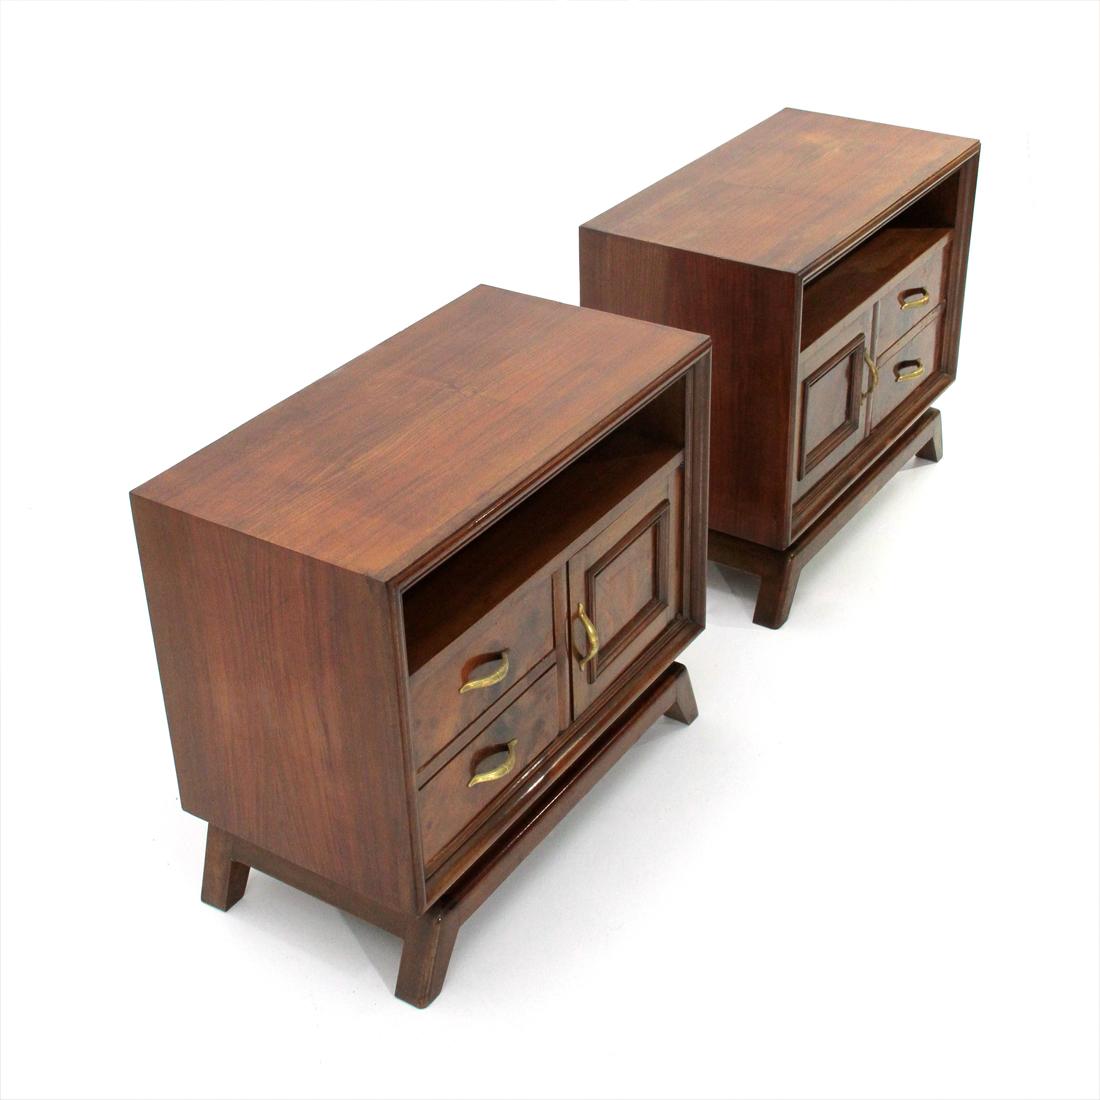 Pair of Italian-made bedside tables produced in the 1950s.
Structure in veneered wood.
Pair of drawers and storage compartment with brass handles
Legs in solid wood.
Good general conditions, some signs due to normal use over time.

Dimensions: